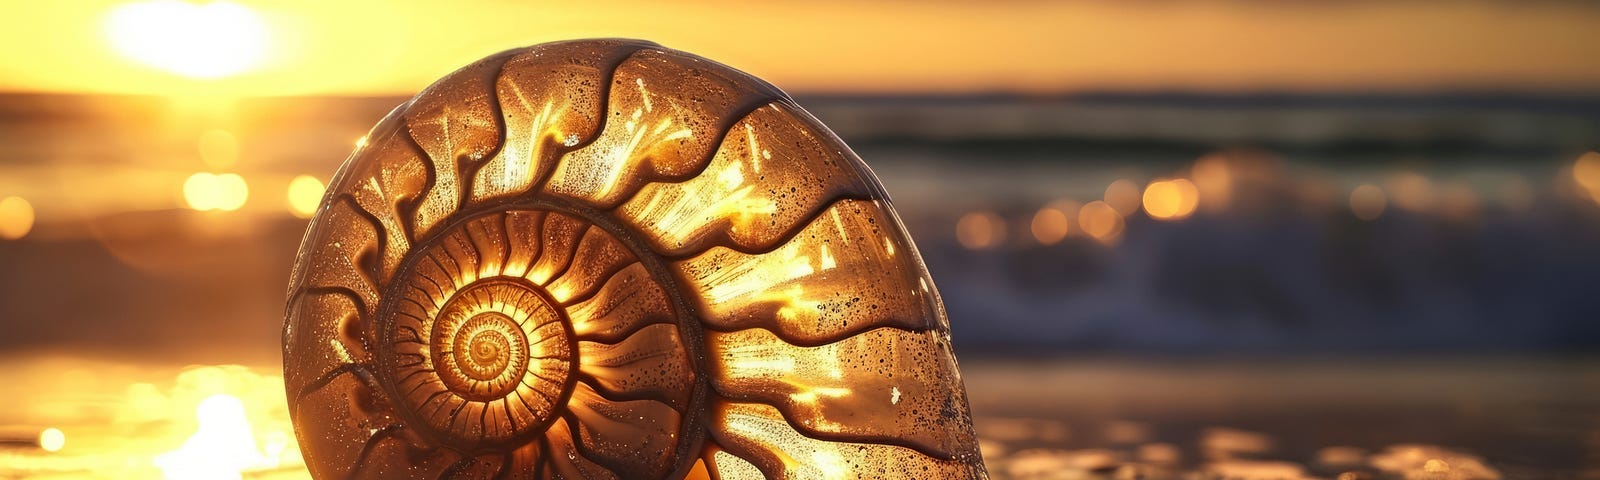 A golden nautilus shell glowing with the light of sunset on a wet reflective beach.